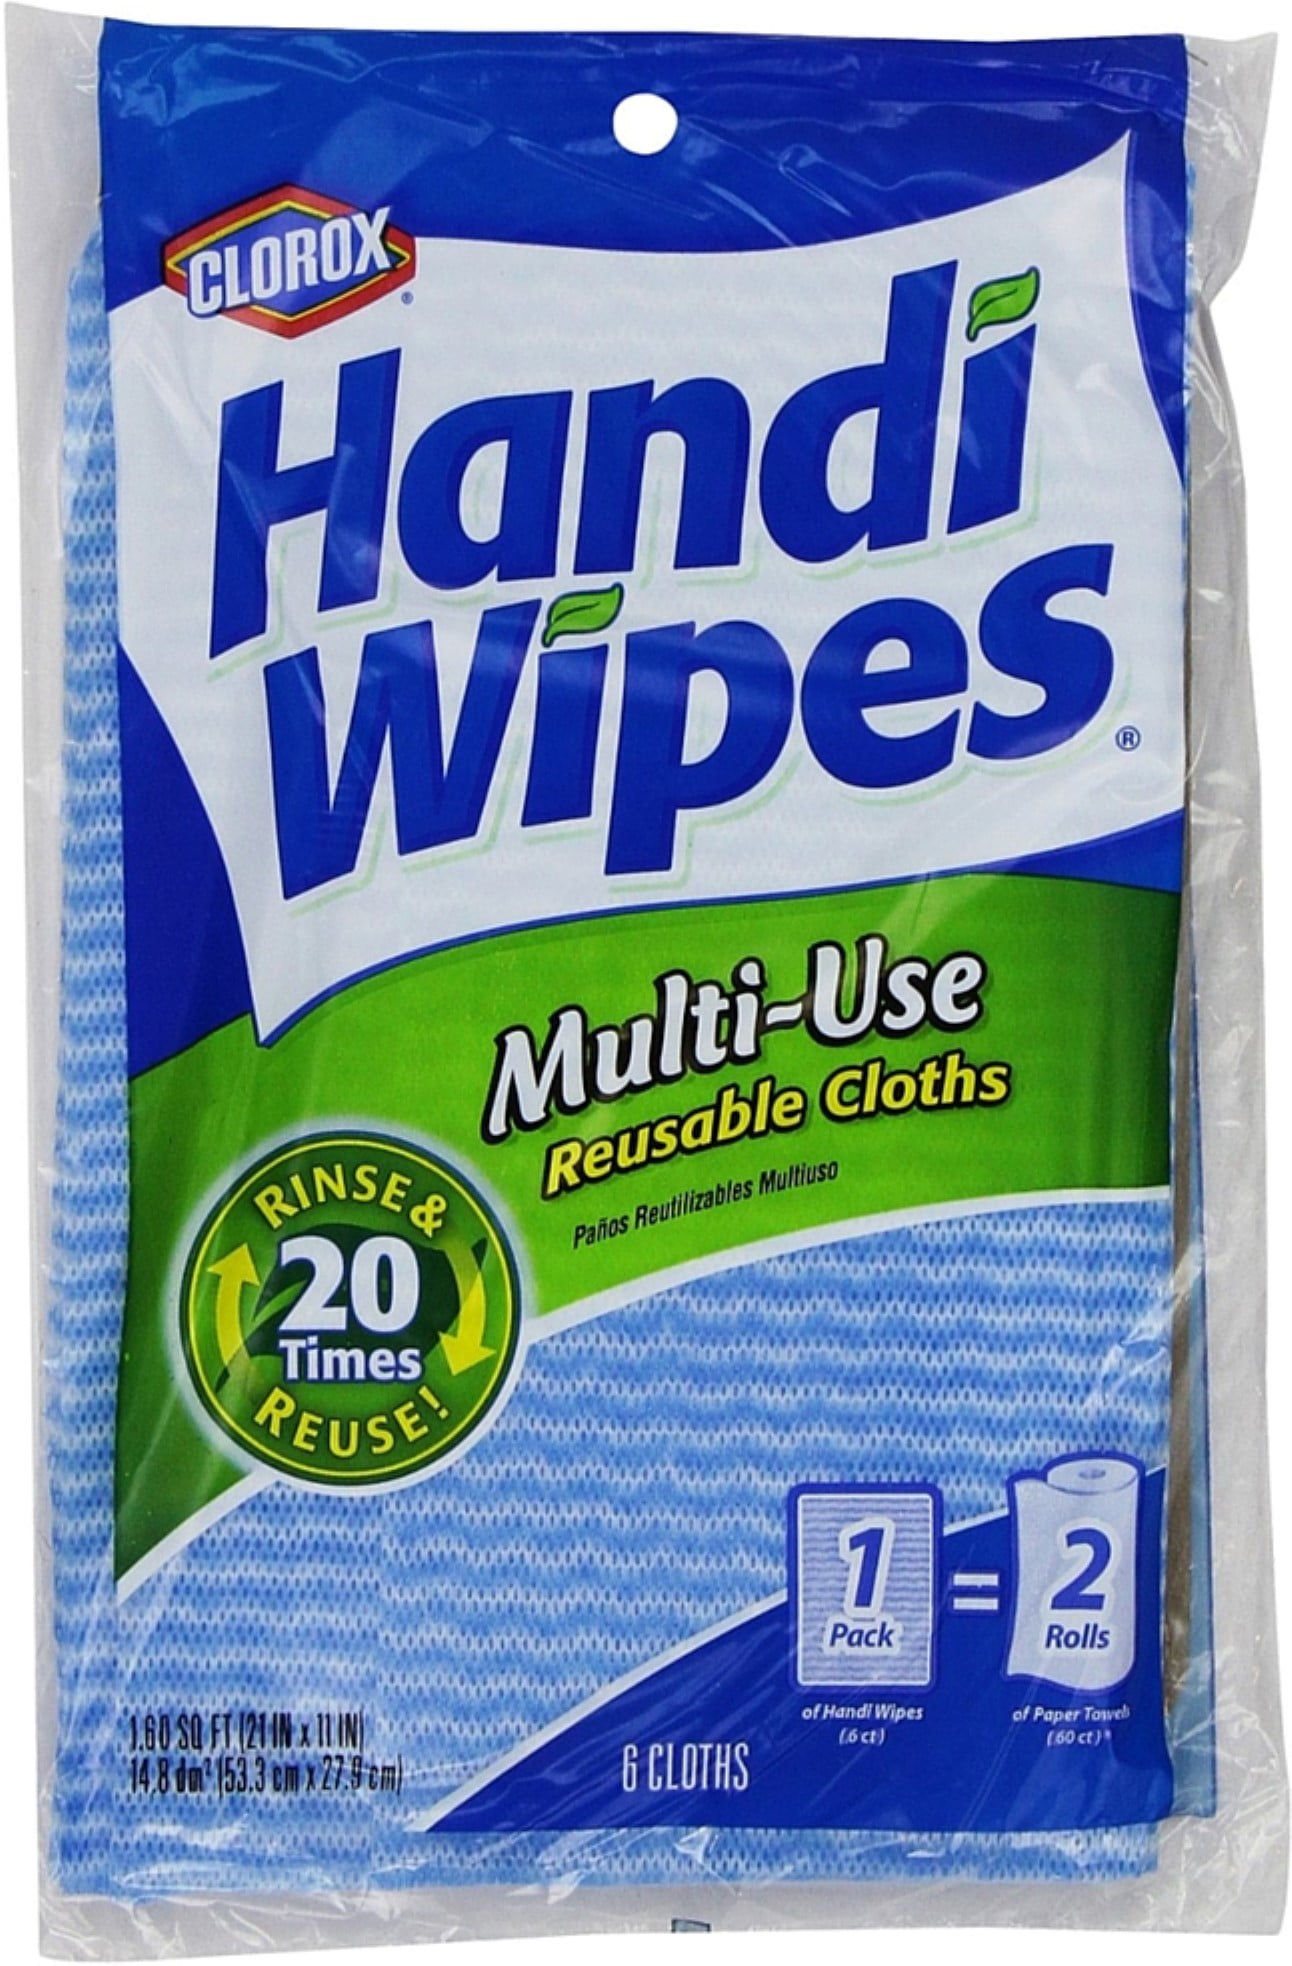 Clorox Handi Wipes Heavy Duty Reusable Cloths 3 Count Pack of 4 Colors May Vary 